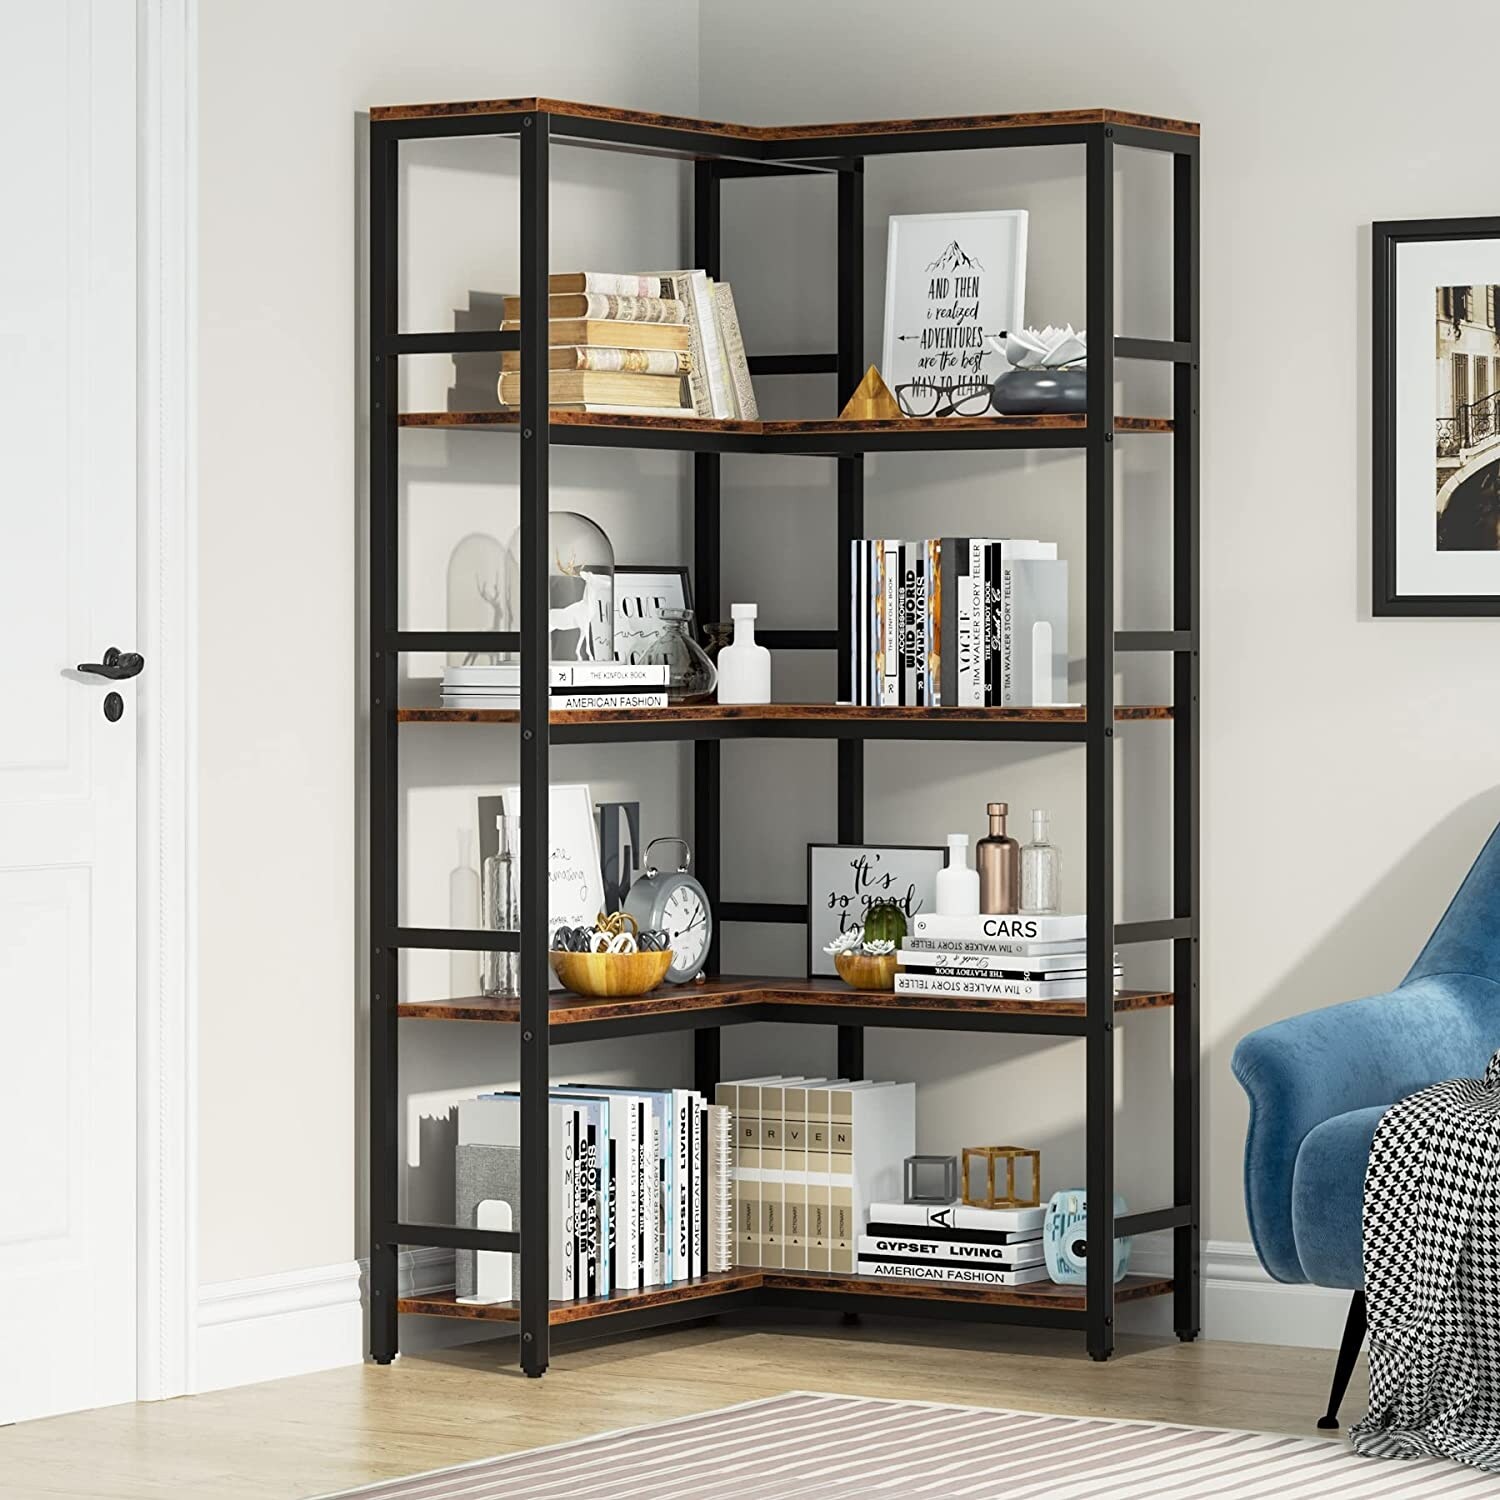 https://ak1.ostkcdn.com/images/products/is/images/direct/62bdc57ccbffb3a17ca25016cae2311333e16cb4/5-Tier-Corner-Bookshelf%2C-Industrial-Large-Corner-Etagere-Bookcase-for-Living-Room-Home-Office%2C-Rustic-Brown.jpg